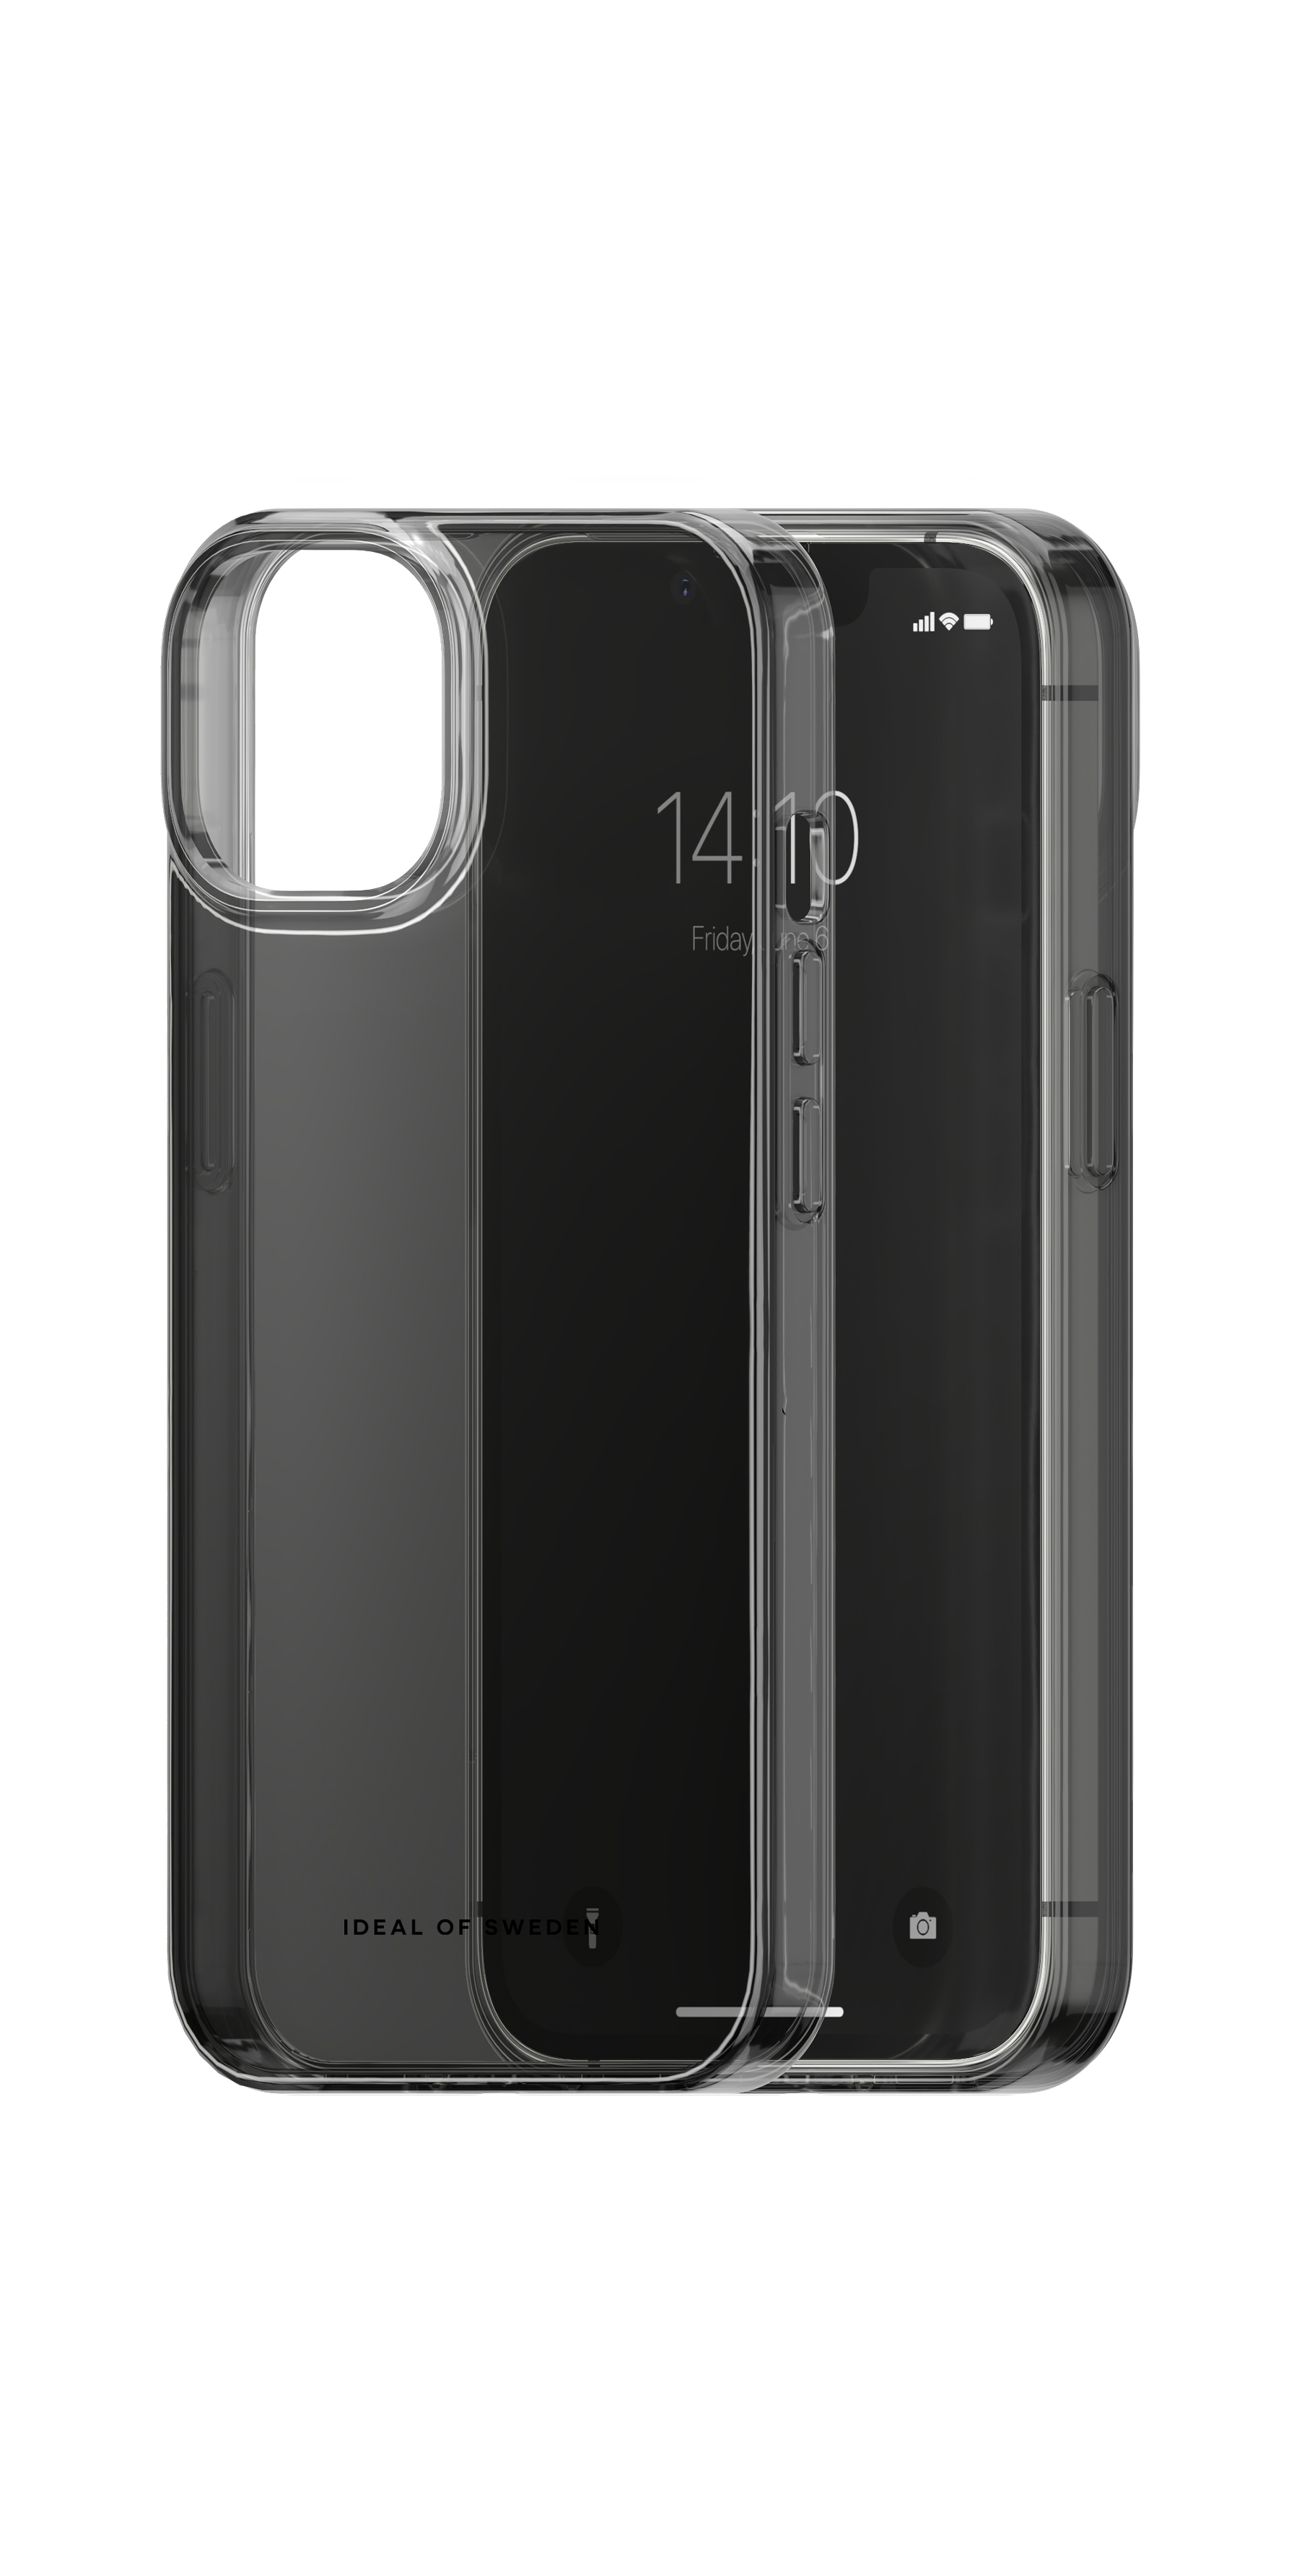 IDEAL OF Tinted 14/13, Backcover, Black Clear iPhone SWEDEN Case, Apple